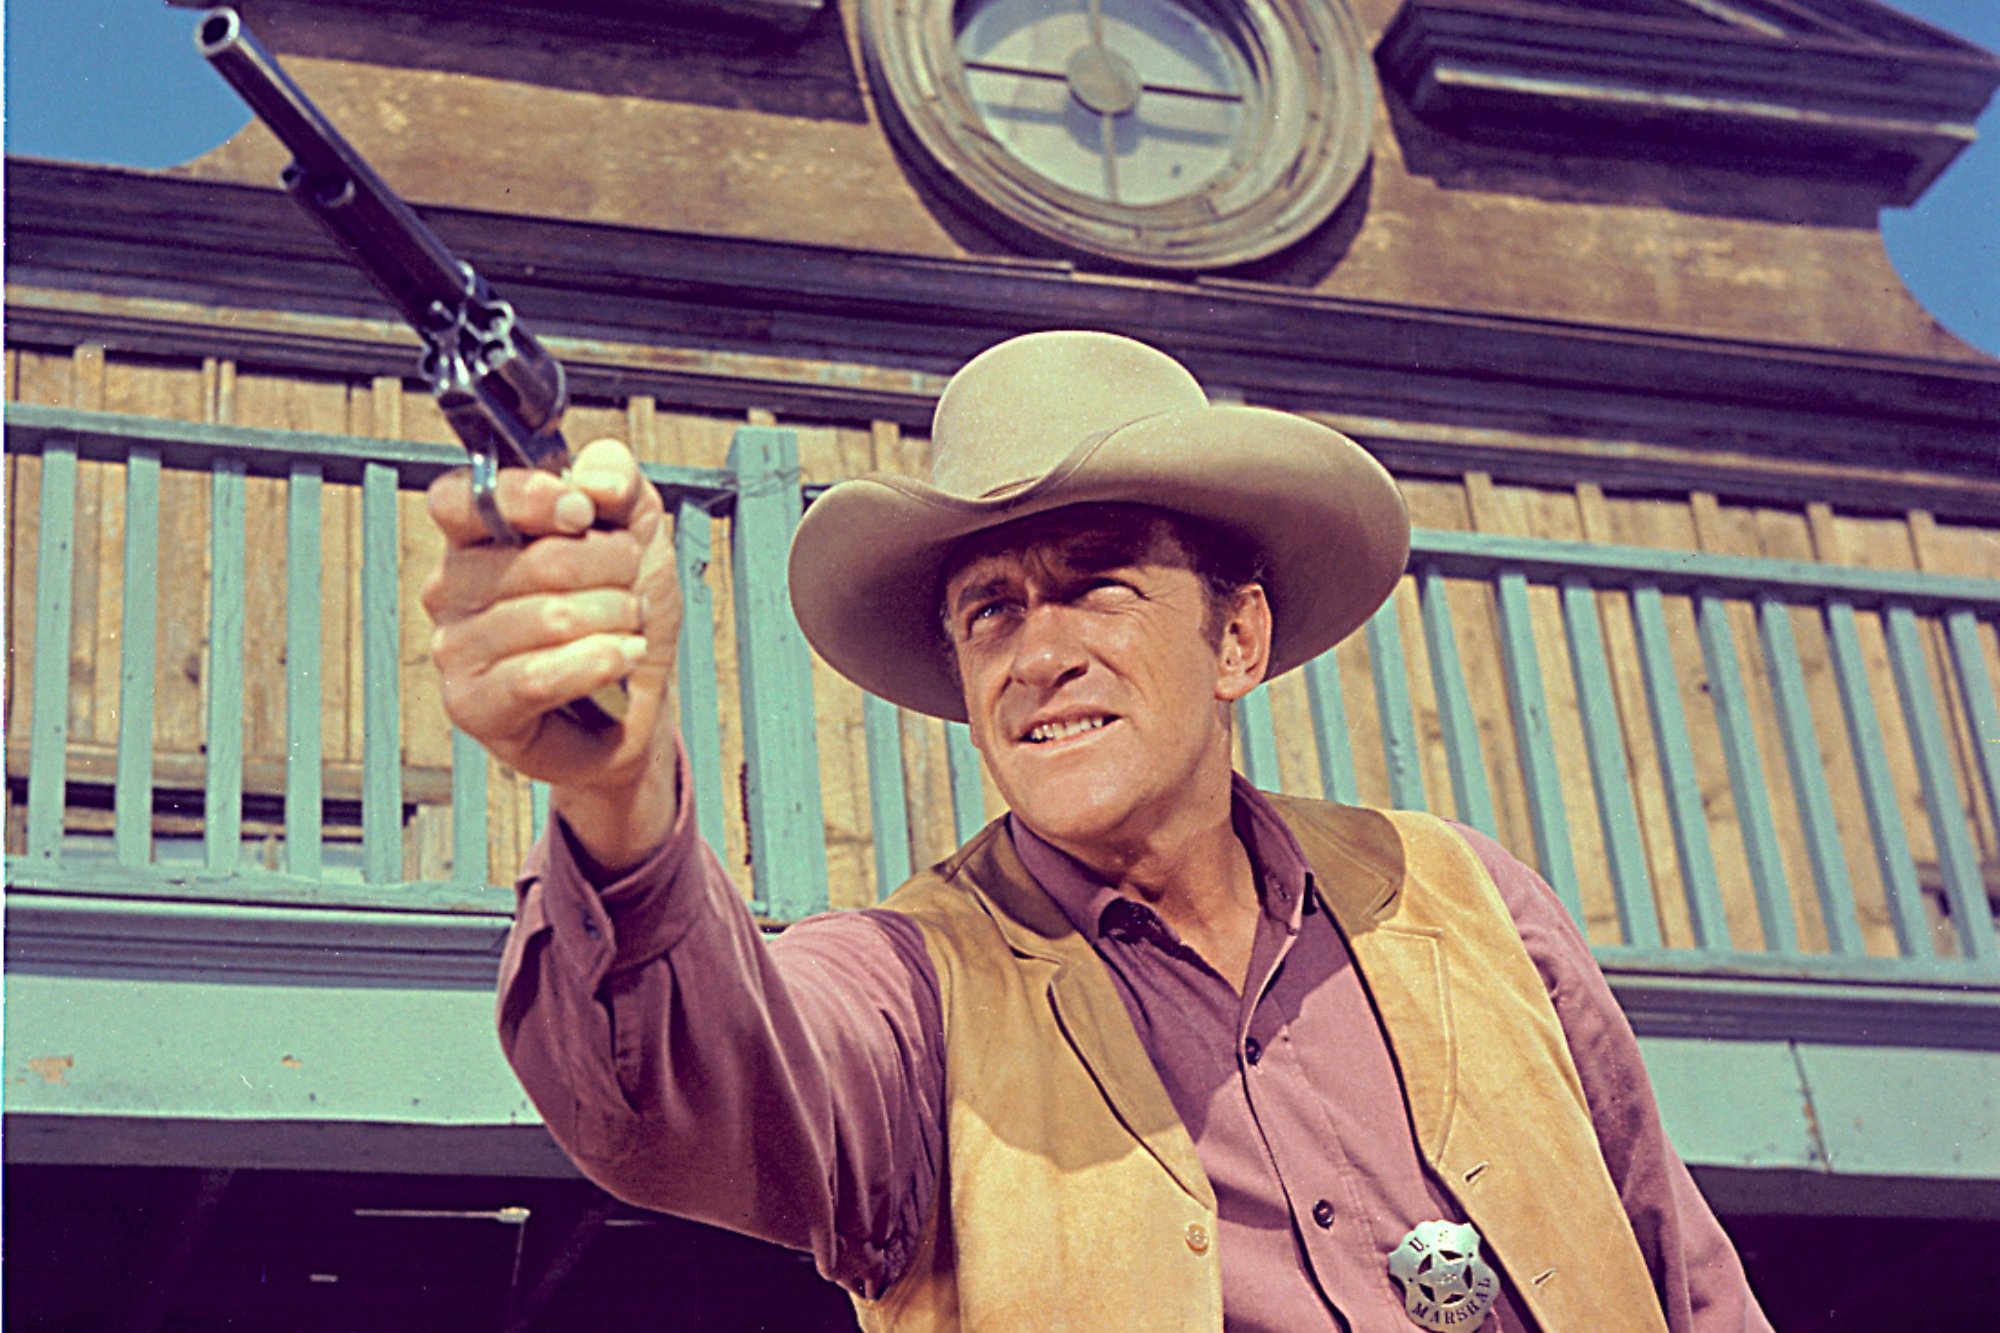 'Gunsmoke' James Arness as Matt Dillon, one of the lead characters pointing his gun out in front of the saloon